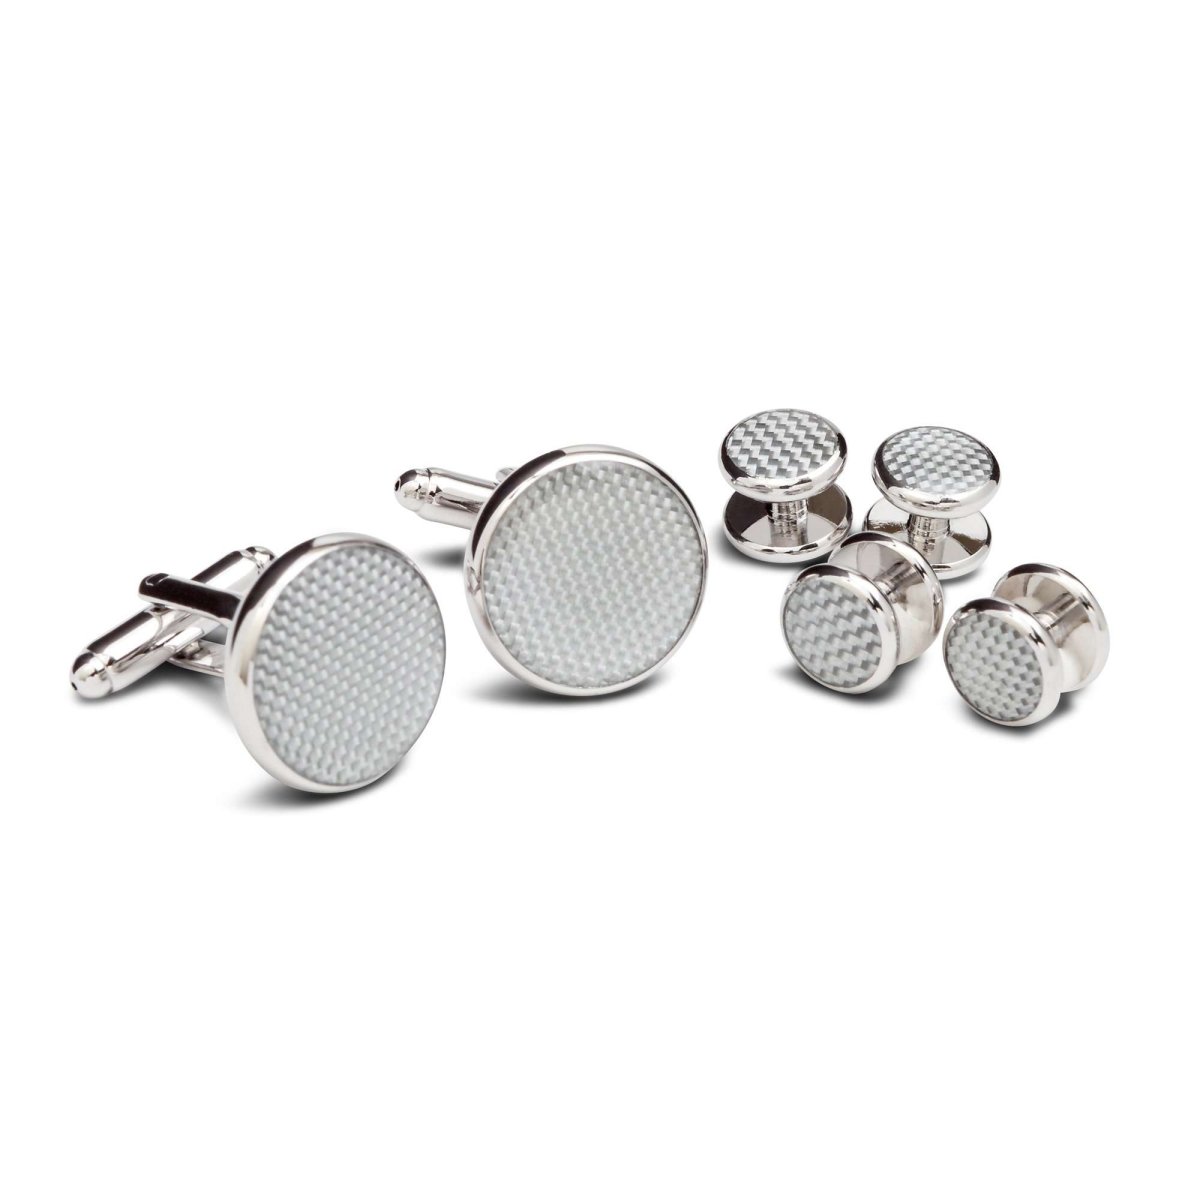 Textured Silver Metal Cufflinks and Studs - MenSuits